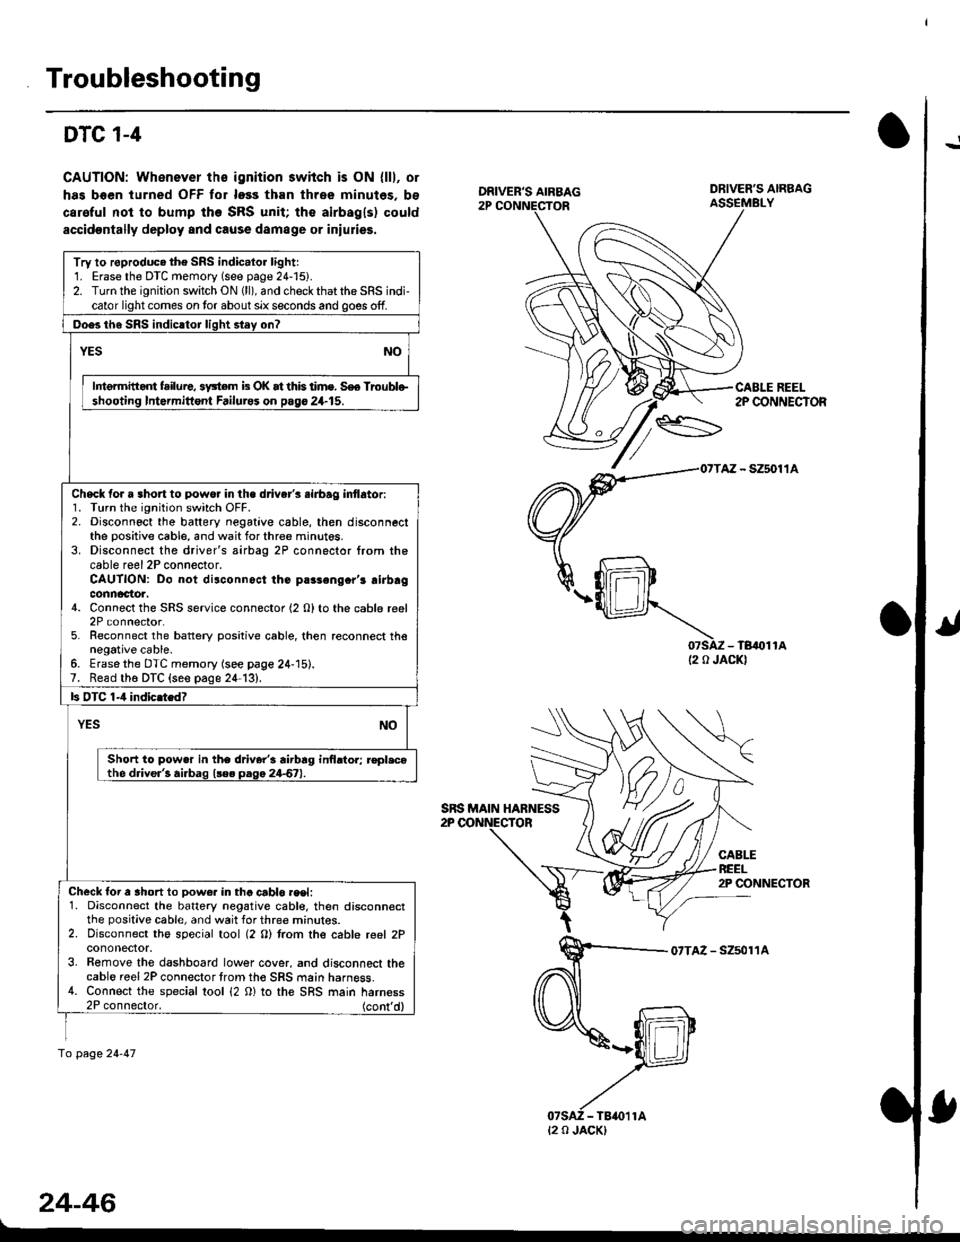 HONDA CIVIC 1996 6.G Service Manual Troubleshooting
!DTC 1-4
CAUTION: Whenever ths ignition 3wiich is ON {lll, or
has boen turned OFF tor loss than three minutes, bs
caroful not to bump the SRS unit; the airbagls) could
accidoDtally dep